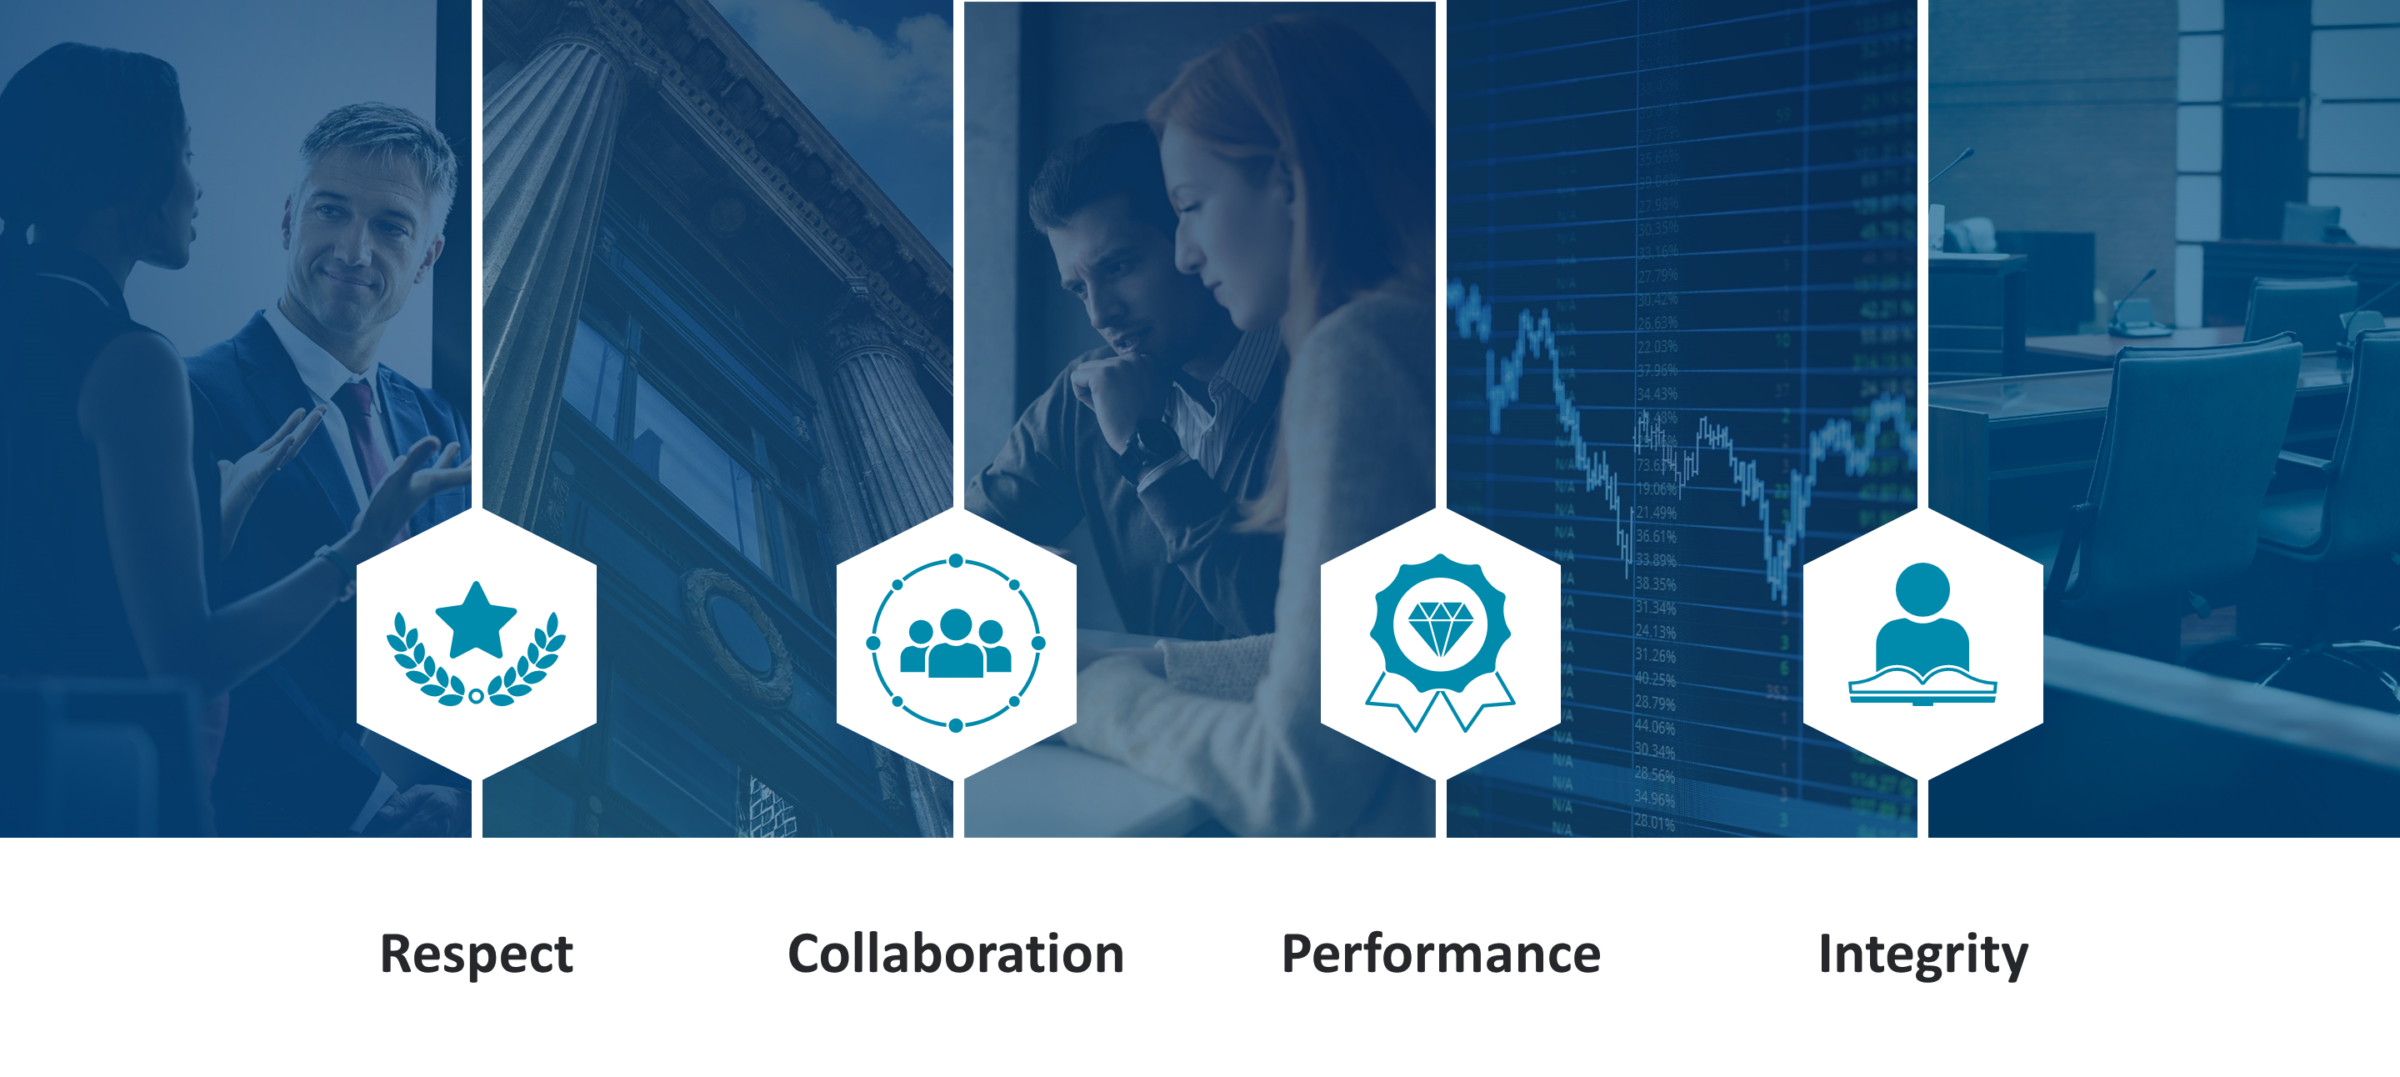 An image with four hexagons that each have an icon representing Brattle's four core values on top of blue-tinted photos of two people having a conversation, the New York Stock Exchange, some stock charts, and the inside of a courtroom. Respect, Collaboration, Performance, and Integrity are written below the images.